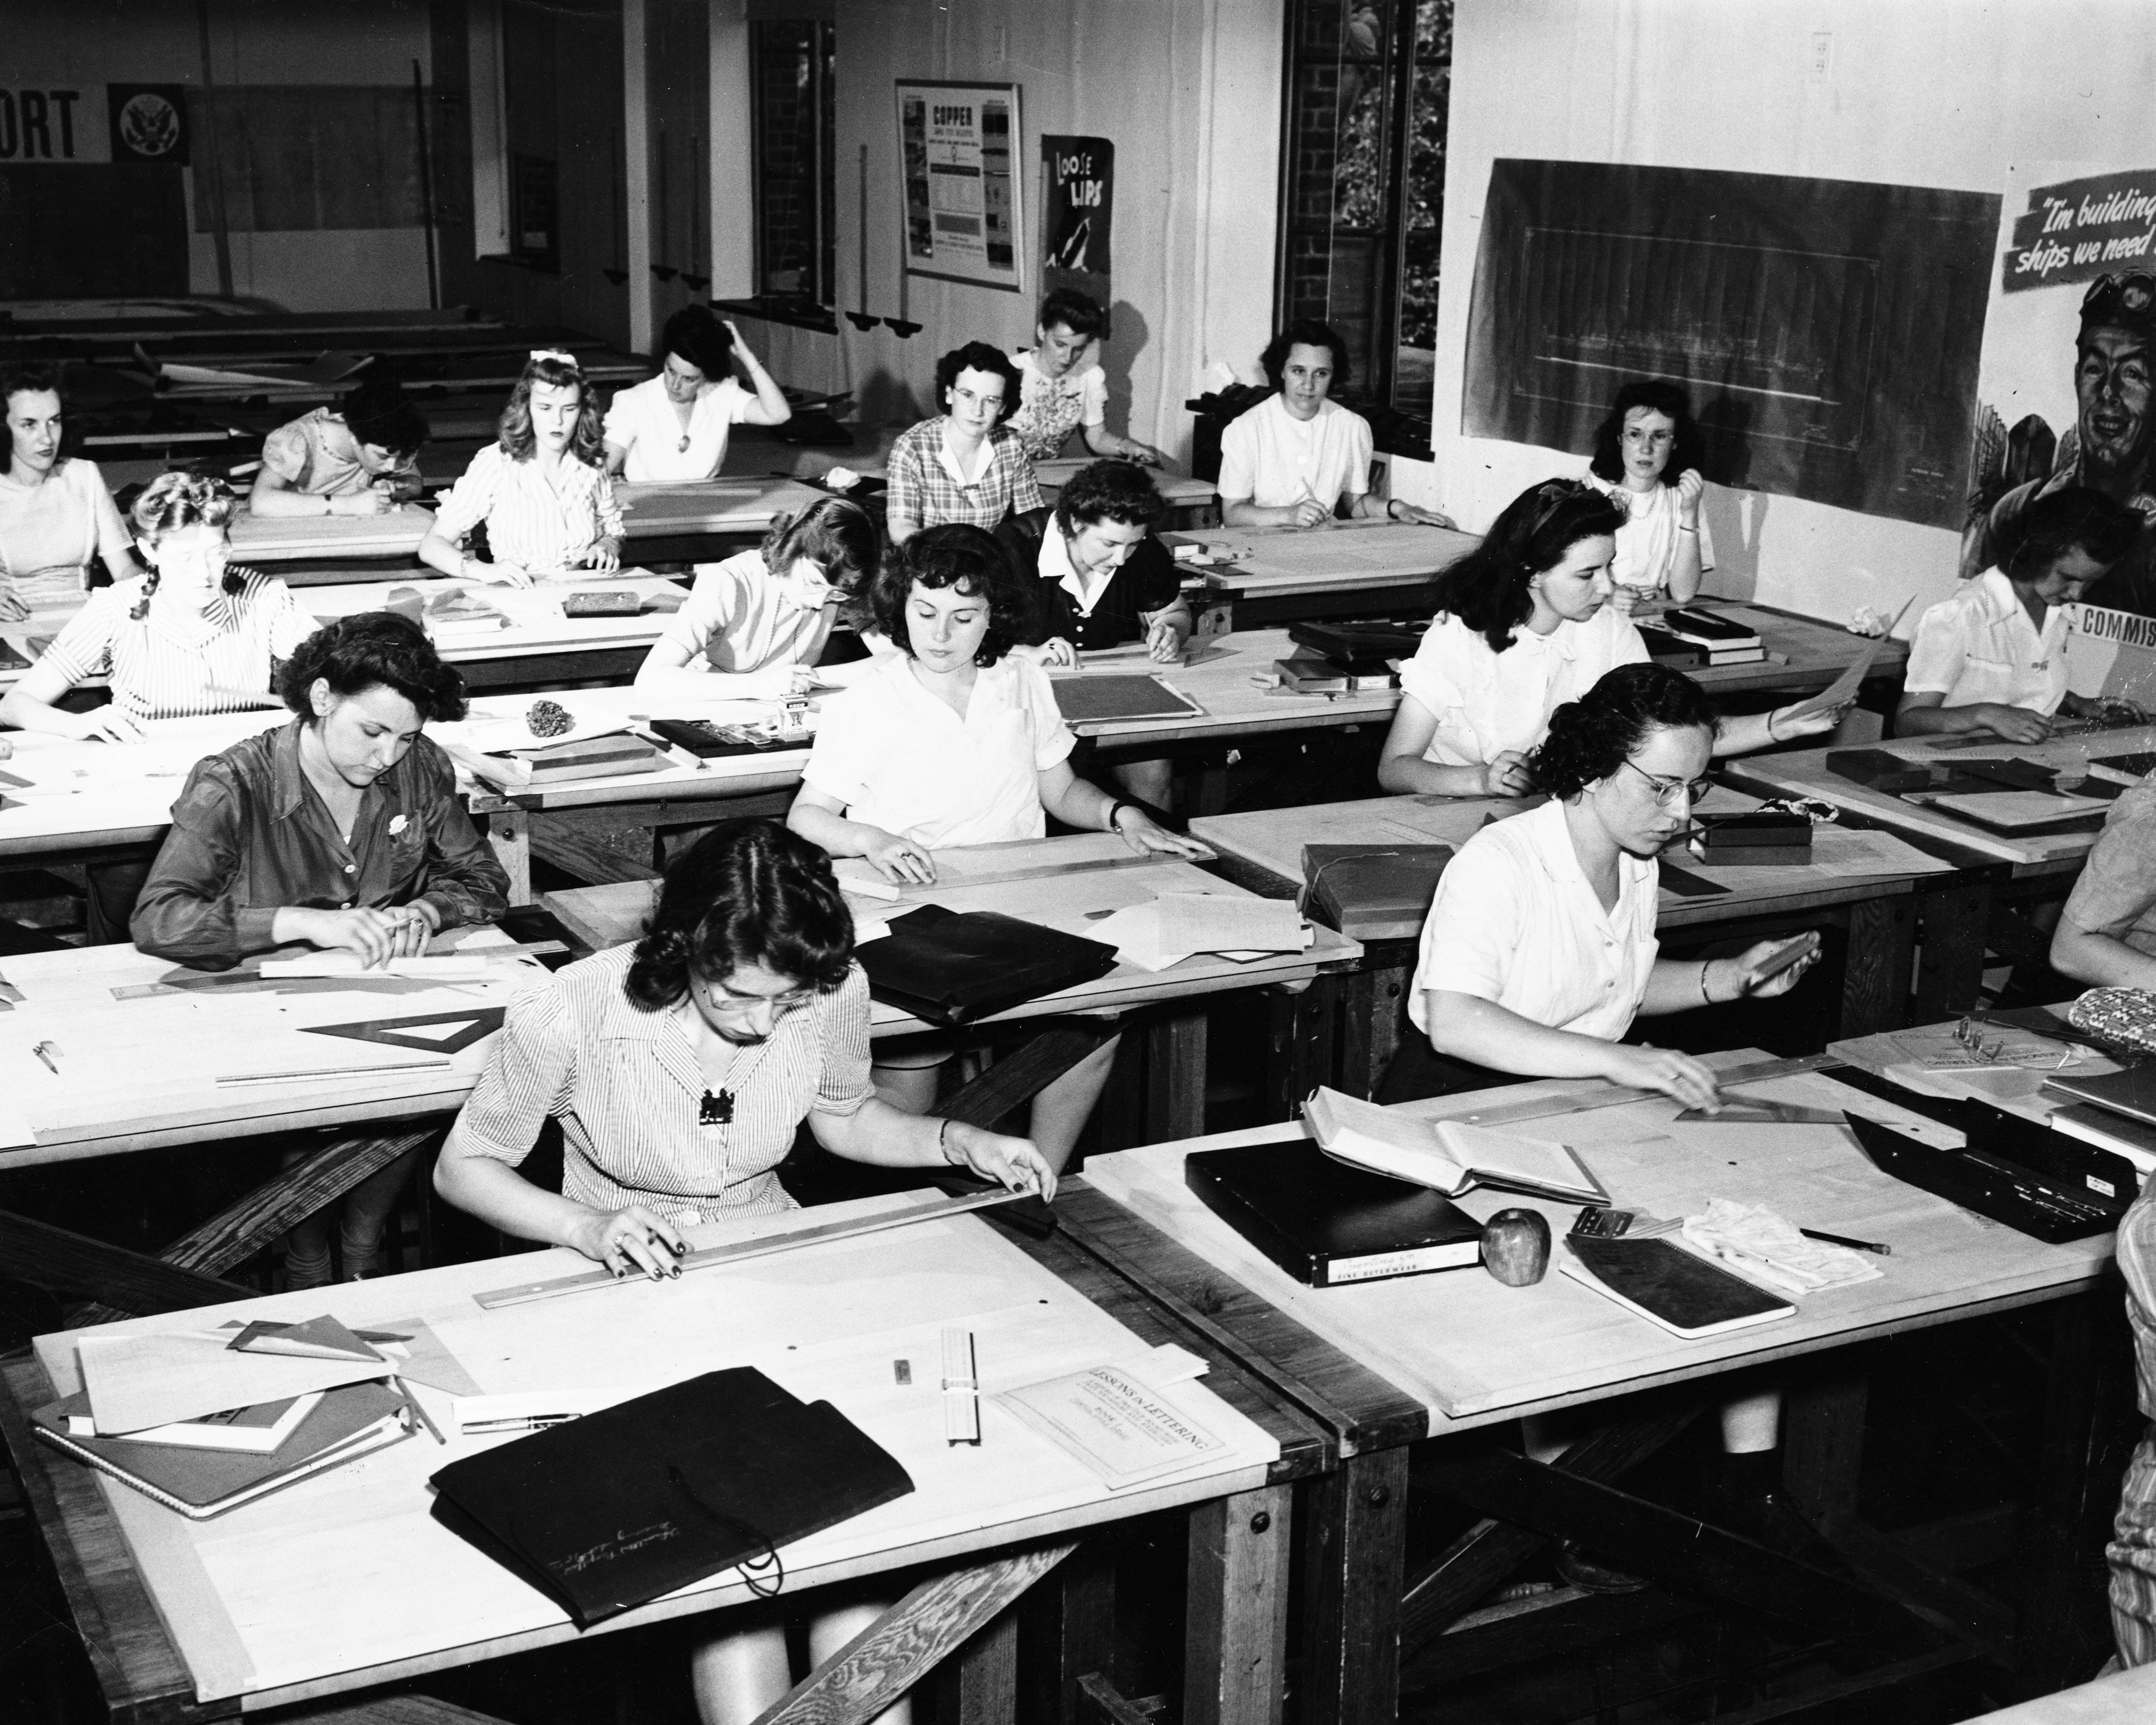 black and white photo of women in the 1950s sitting at desks in a classroom